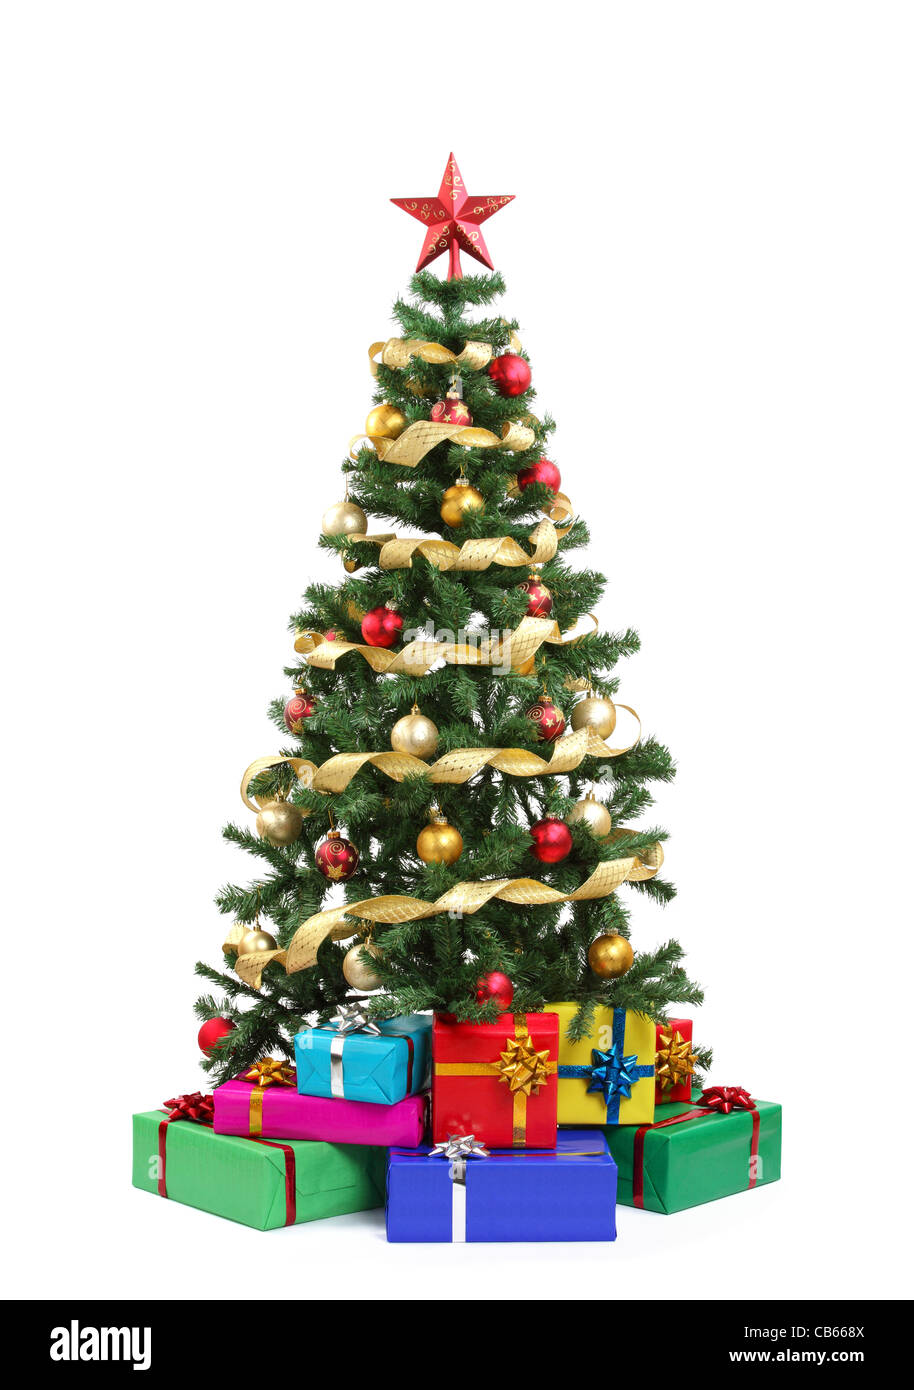 Christmas tree and gifts.Isolated on white. Stock Photo